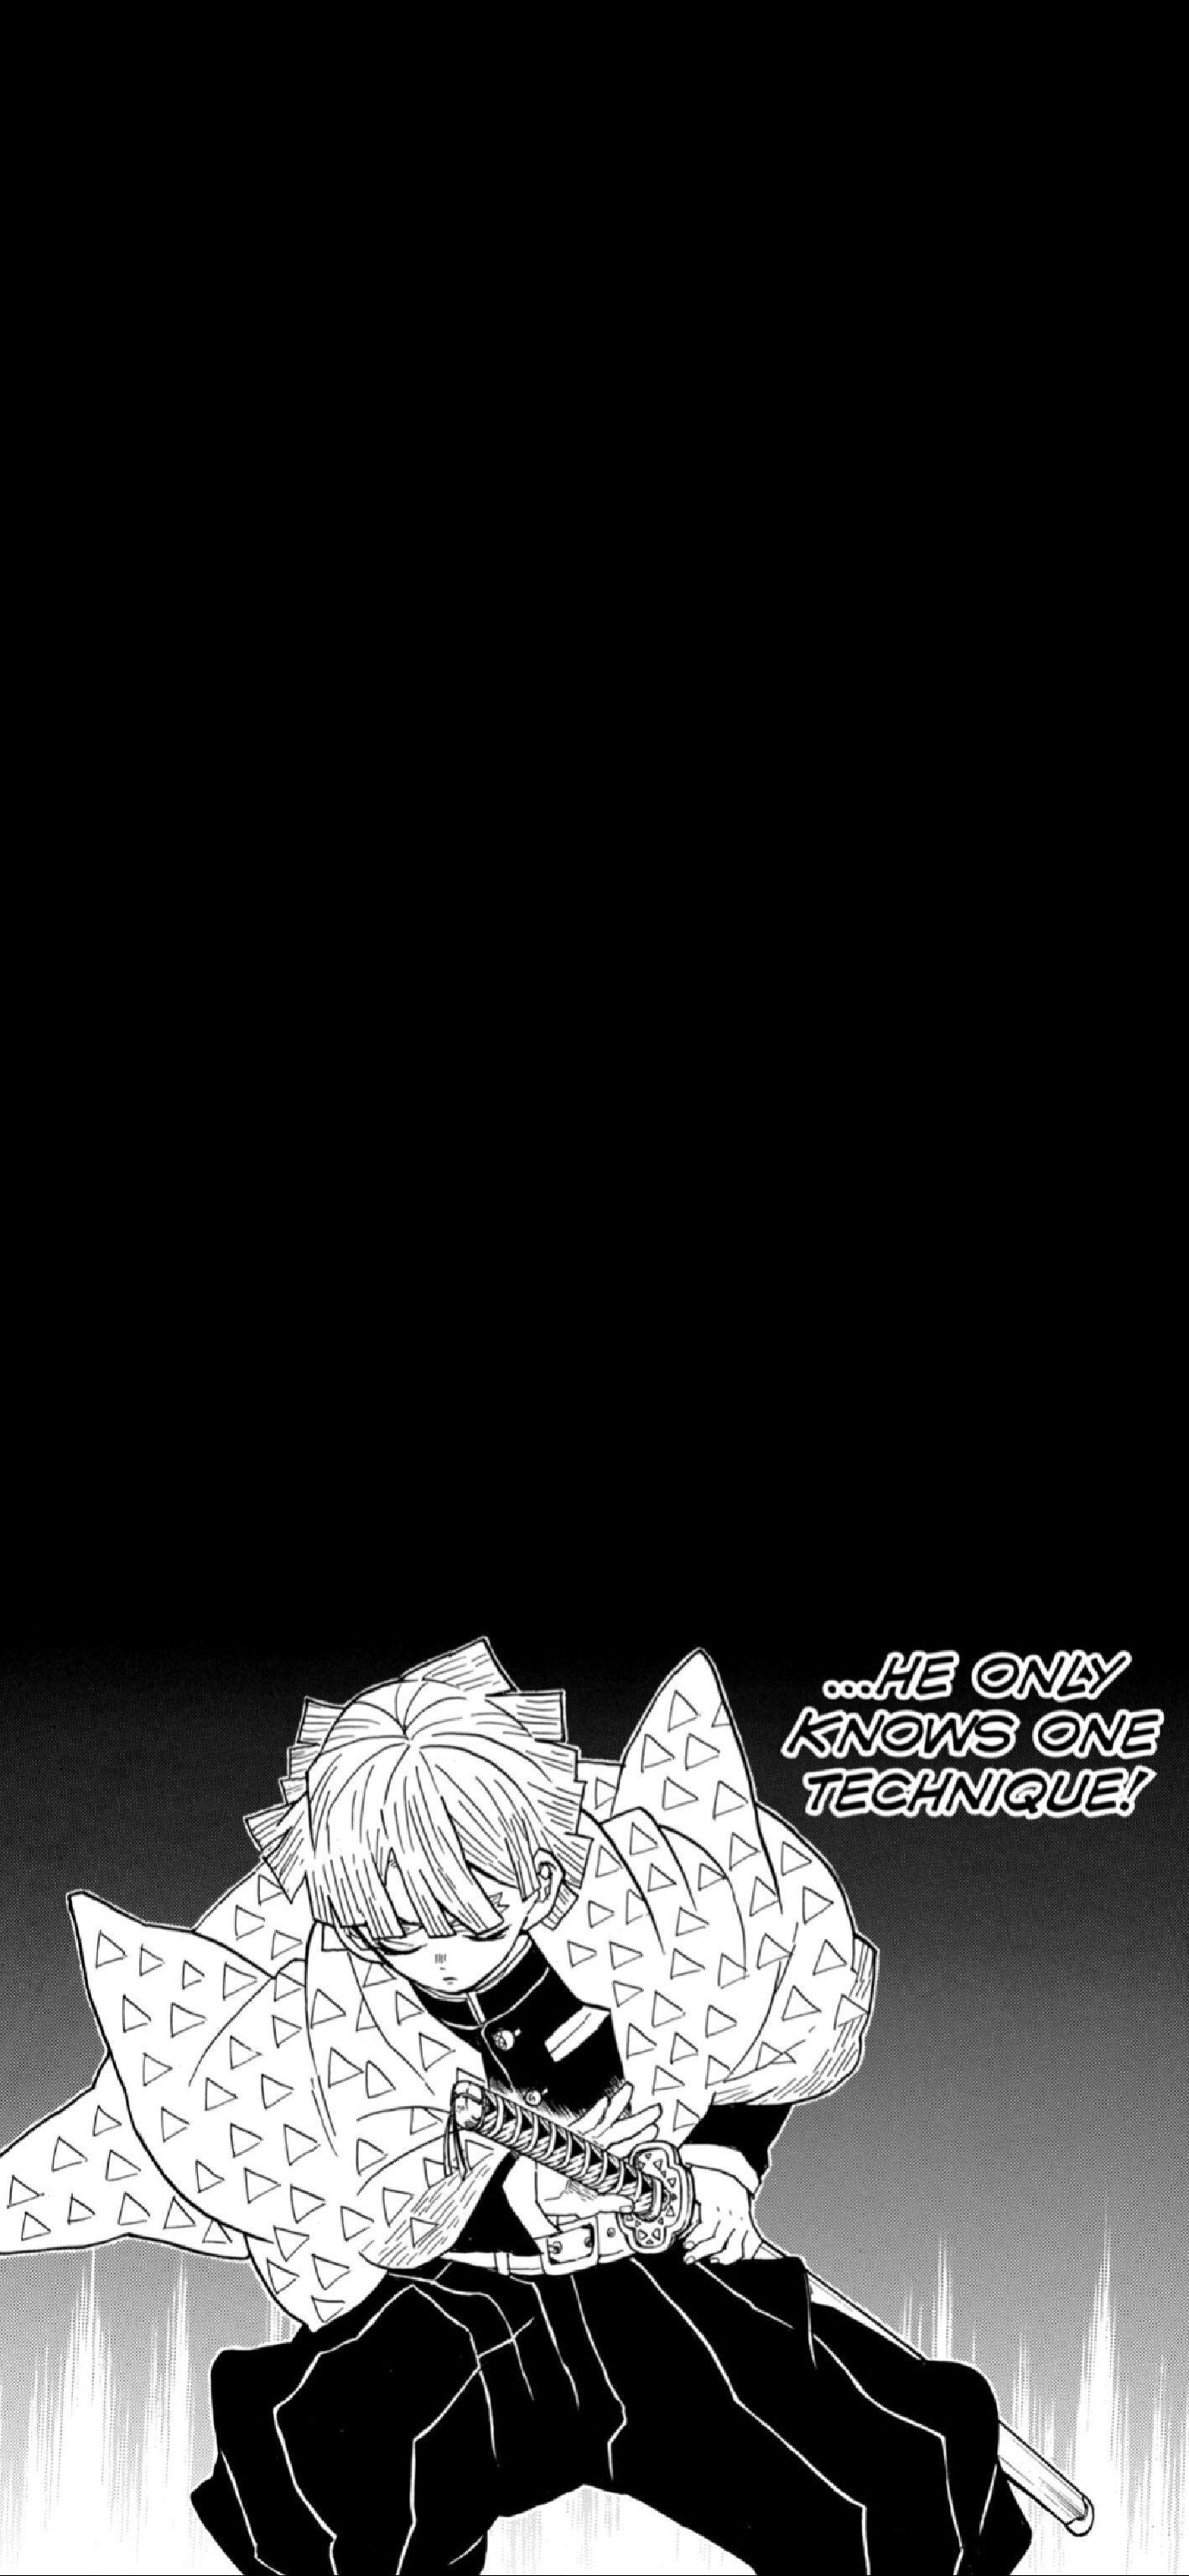 I made a iPhone wallpaper of Zenitsu from the manga :p